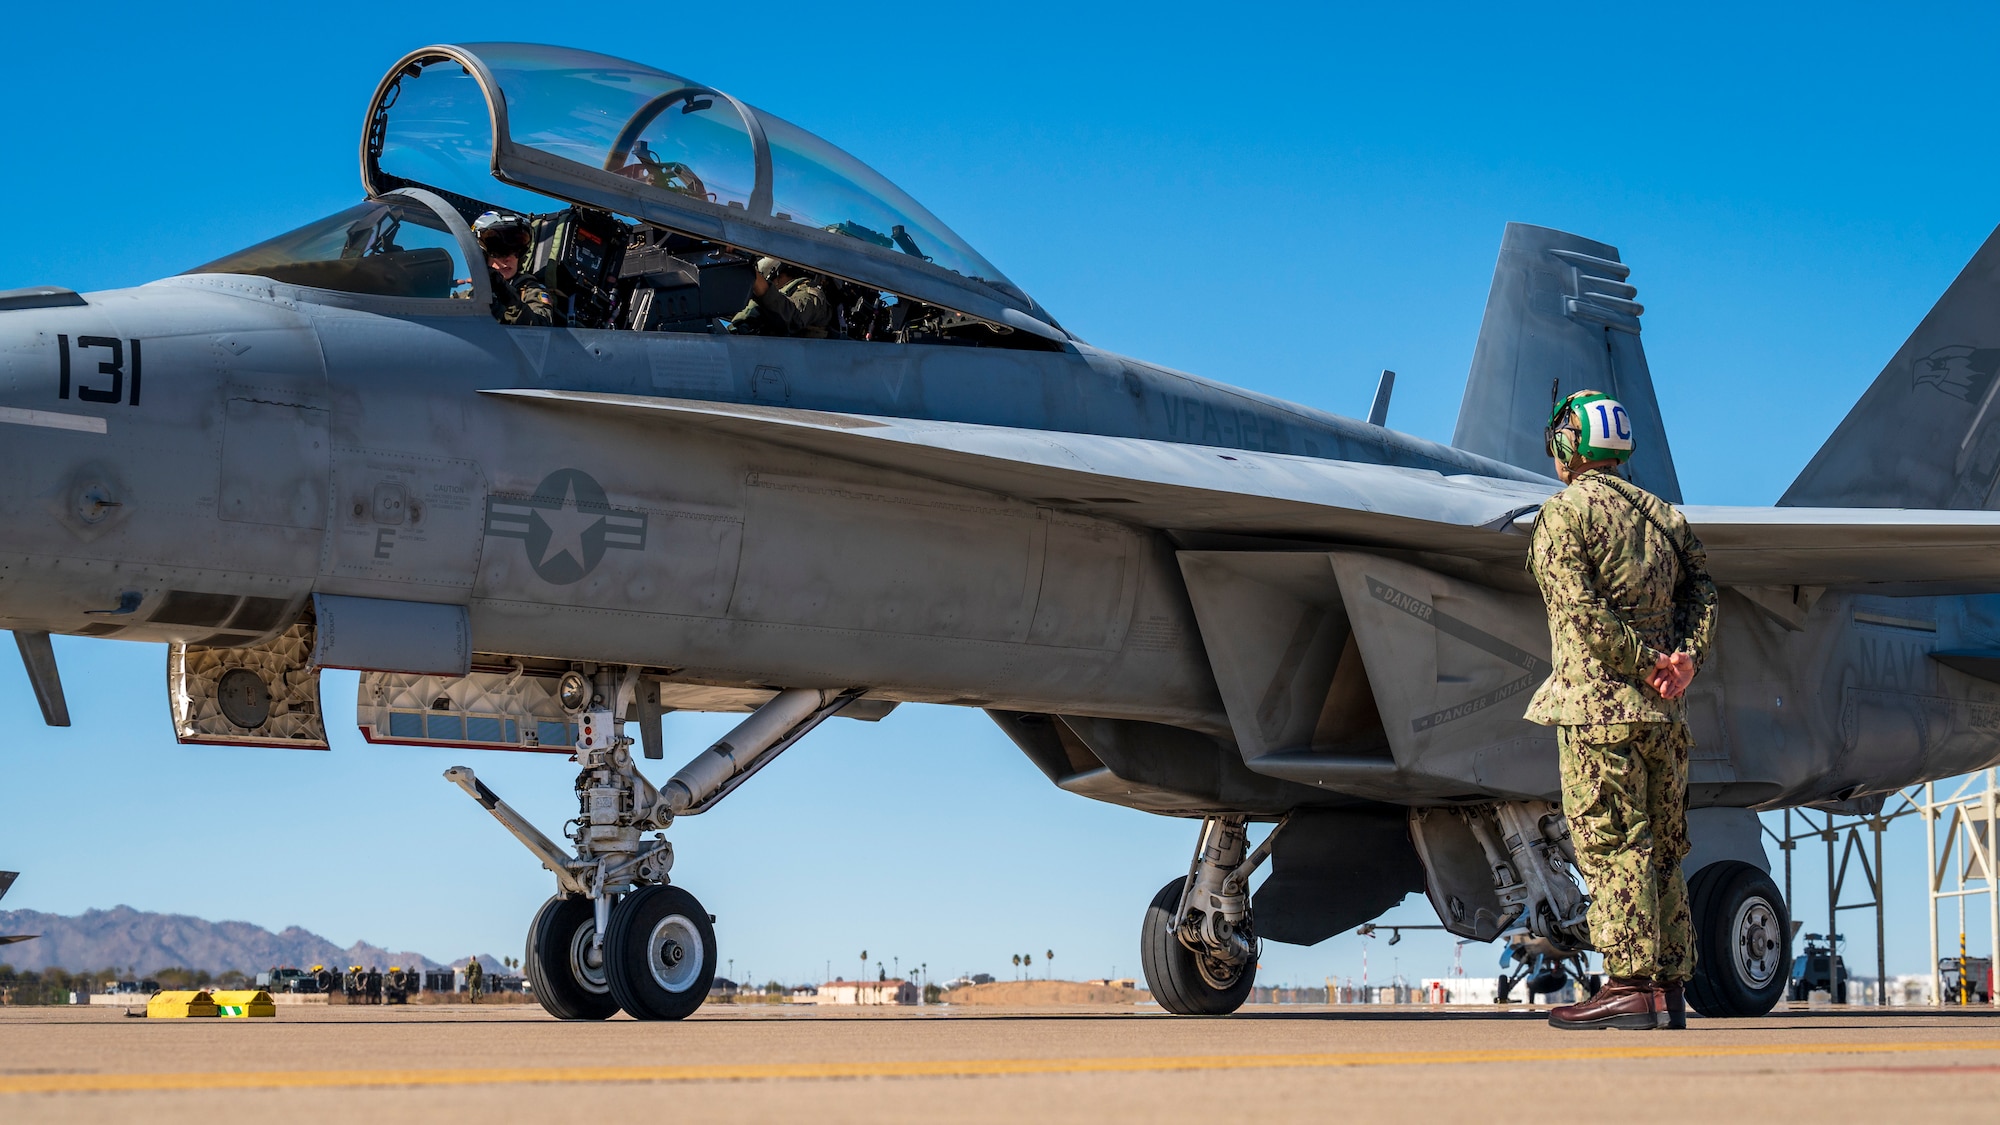 U.S. Navy ADC Kevin Frey catches an F/A-18E Super Hornet assigned to the “Flying Eagles” of Strike Fighter Squadron (VFA) 122, Lemoore, California, at Luke Air Force Base, Arizona, Feb. 7, 2023.